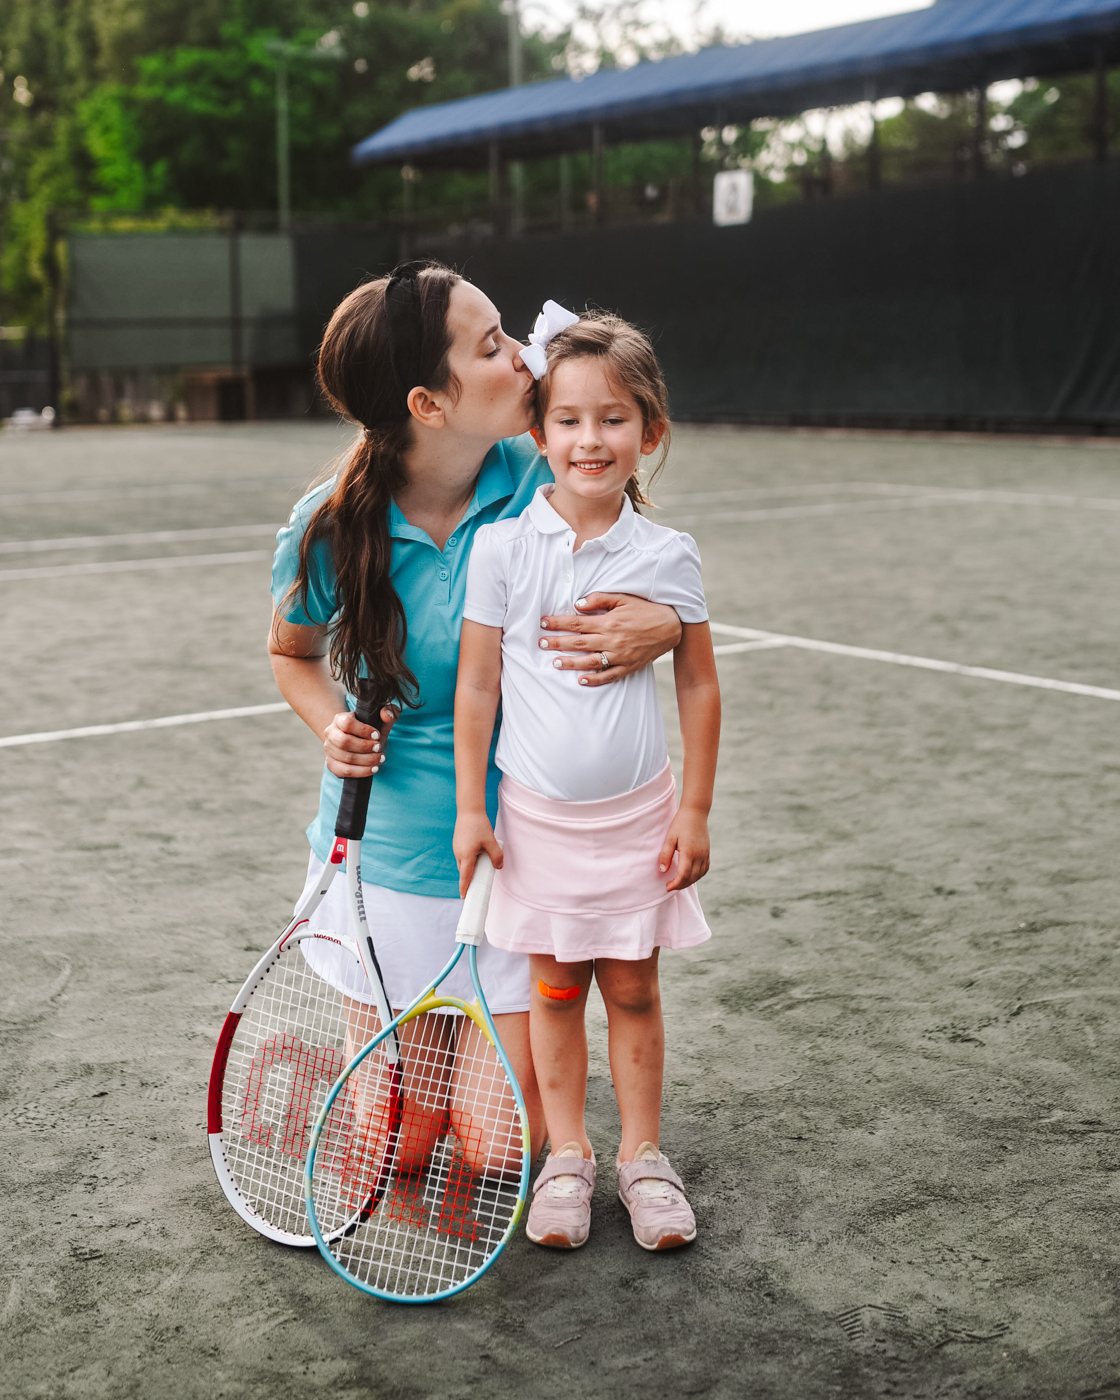 Tennis Outfits by popular Memphis fashion blog, Lone Star Looking Glass: image of a mom kissing her daughter on the cheek as they stand on a tennis court and hold tennis rackets and wearing tennis skirts, sneakers, and tennis polos. 